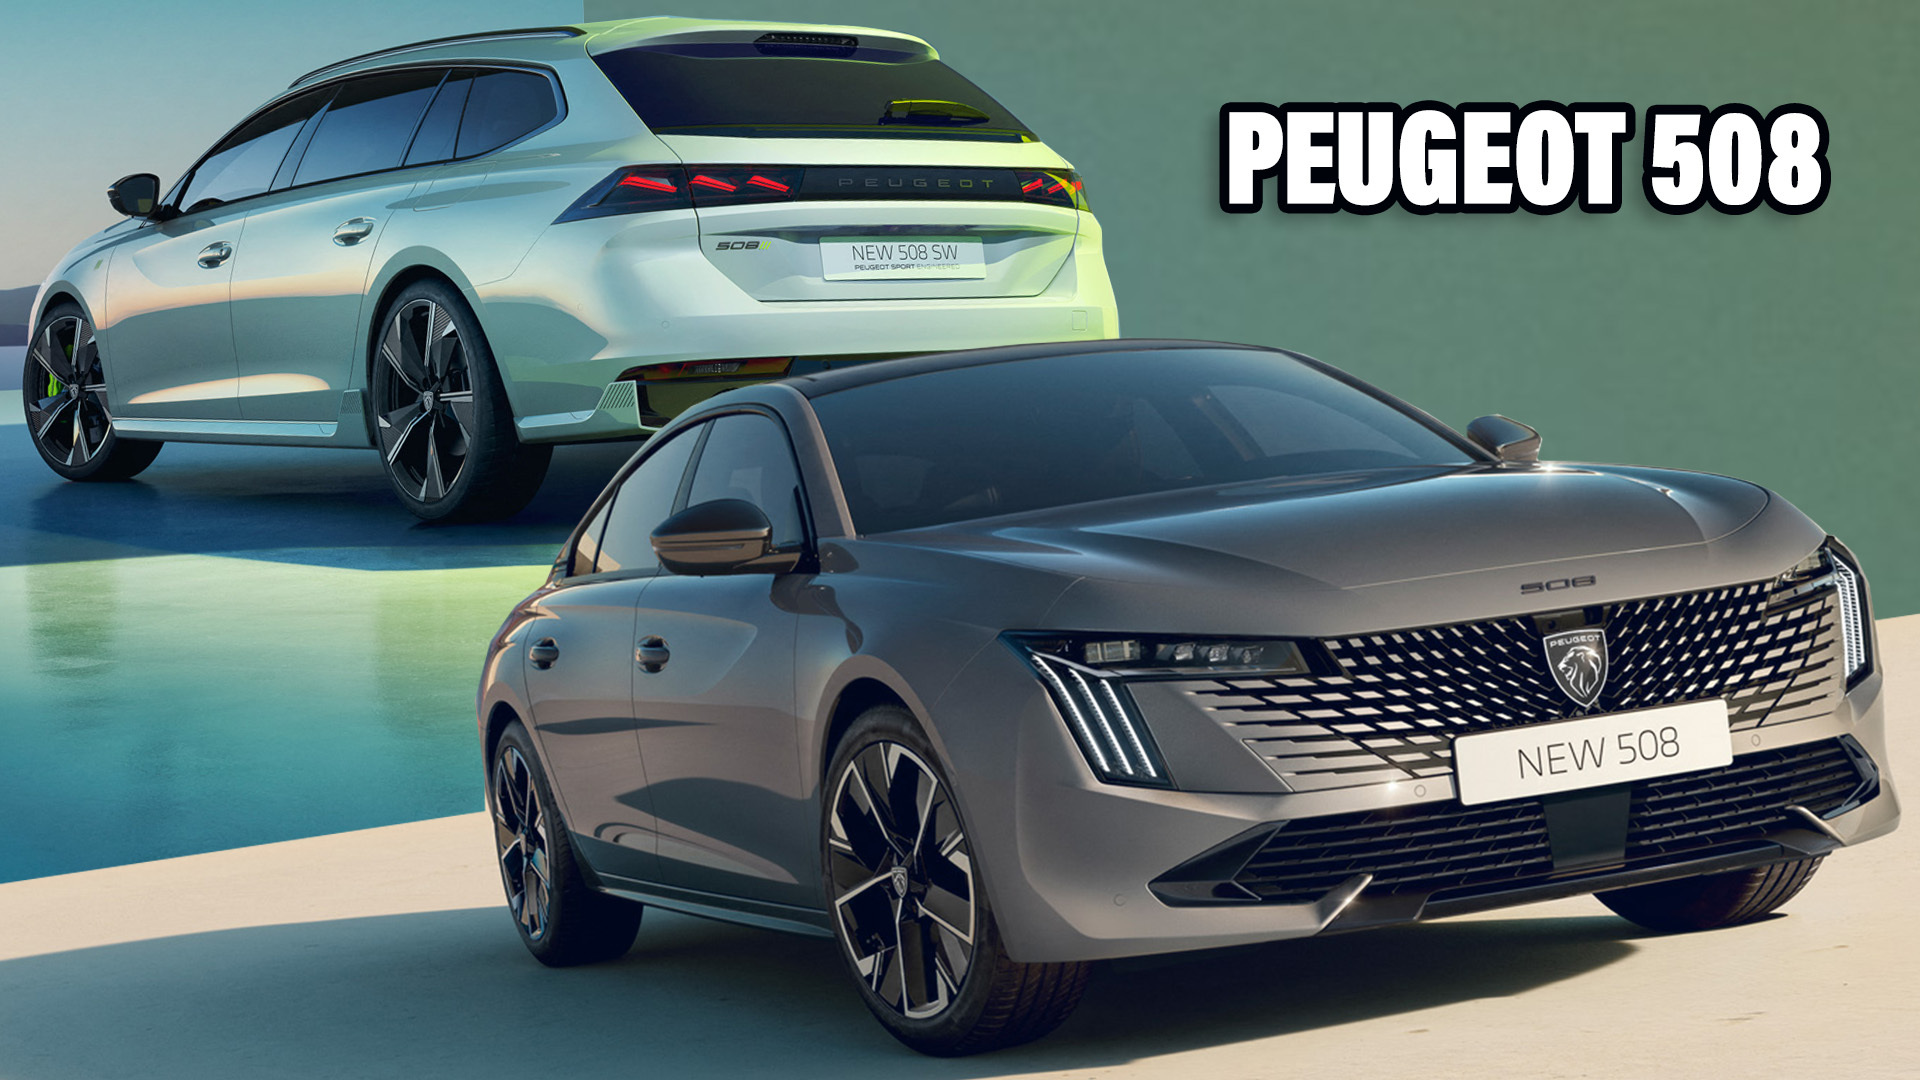 Oh no! We might not see any more Peugeot Sport Engineered road cars